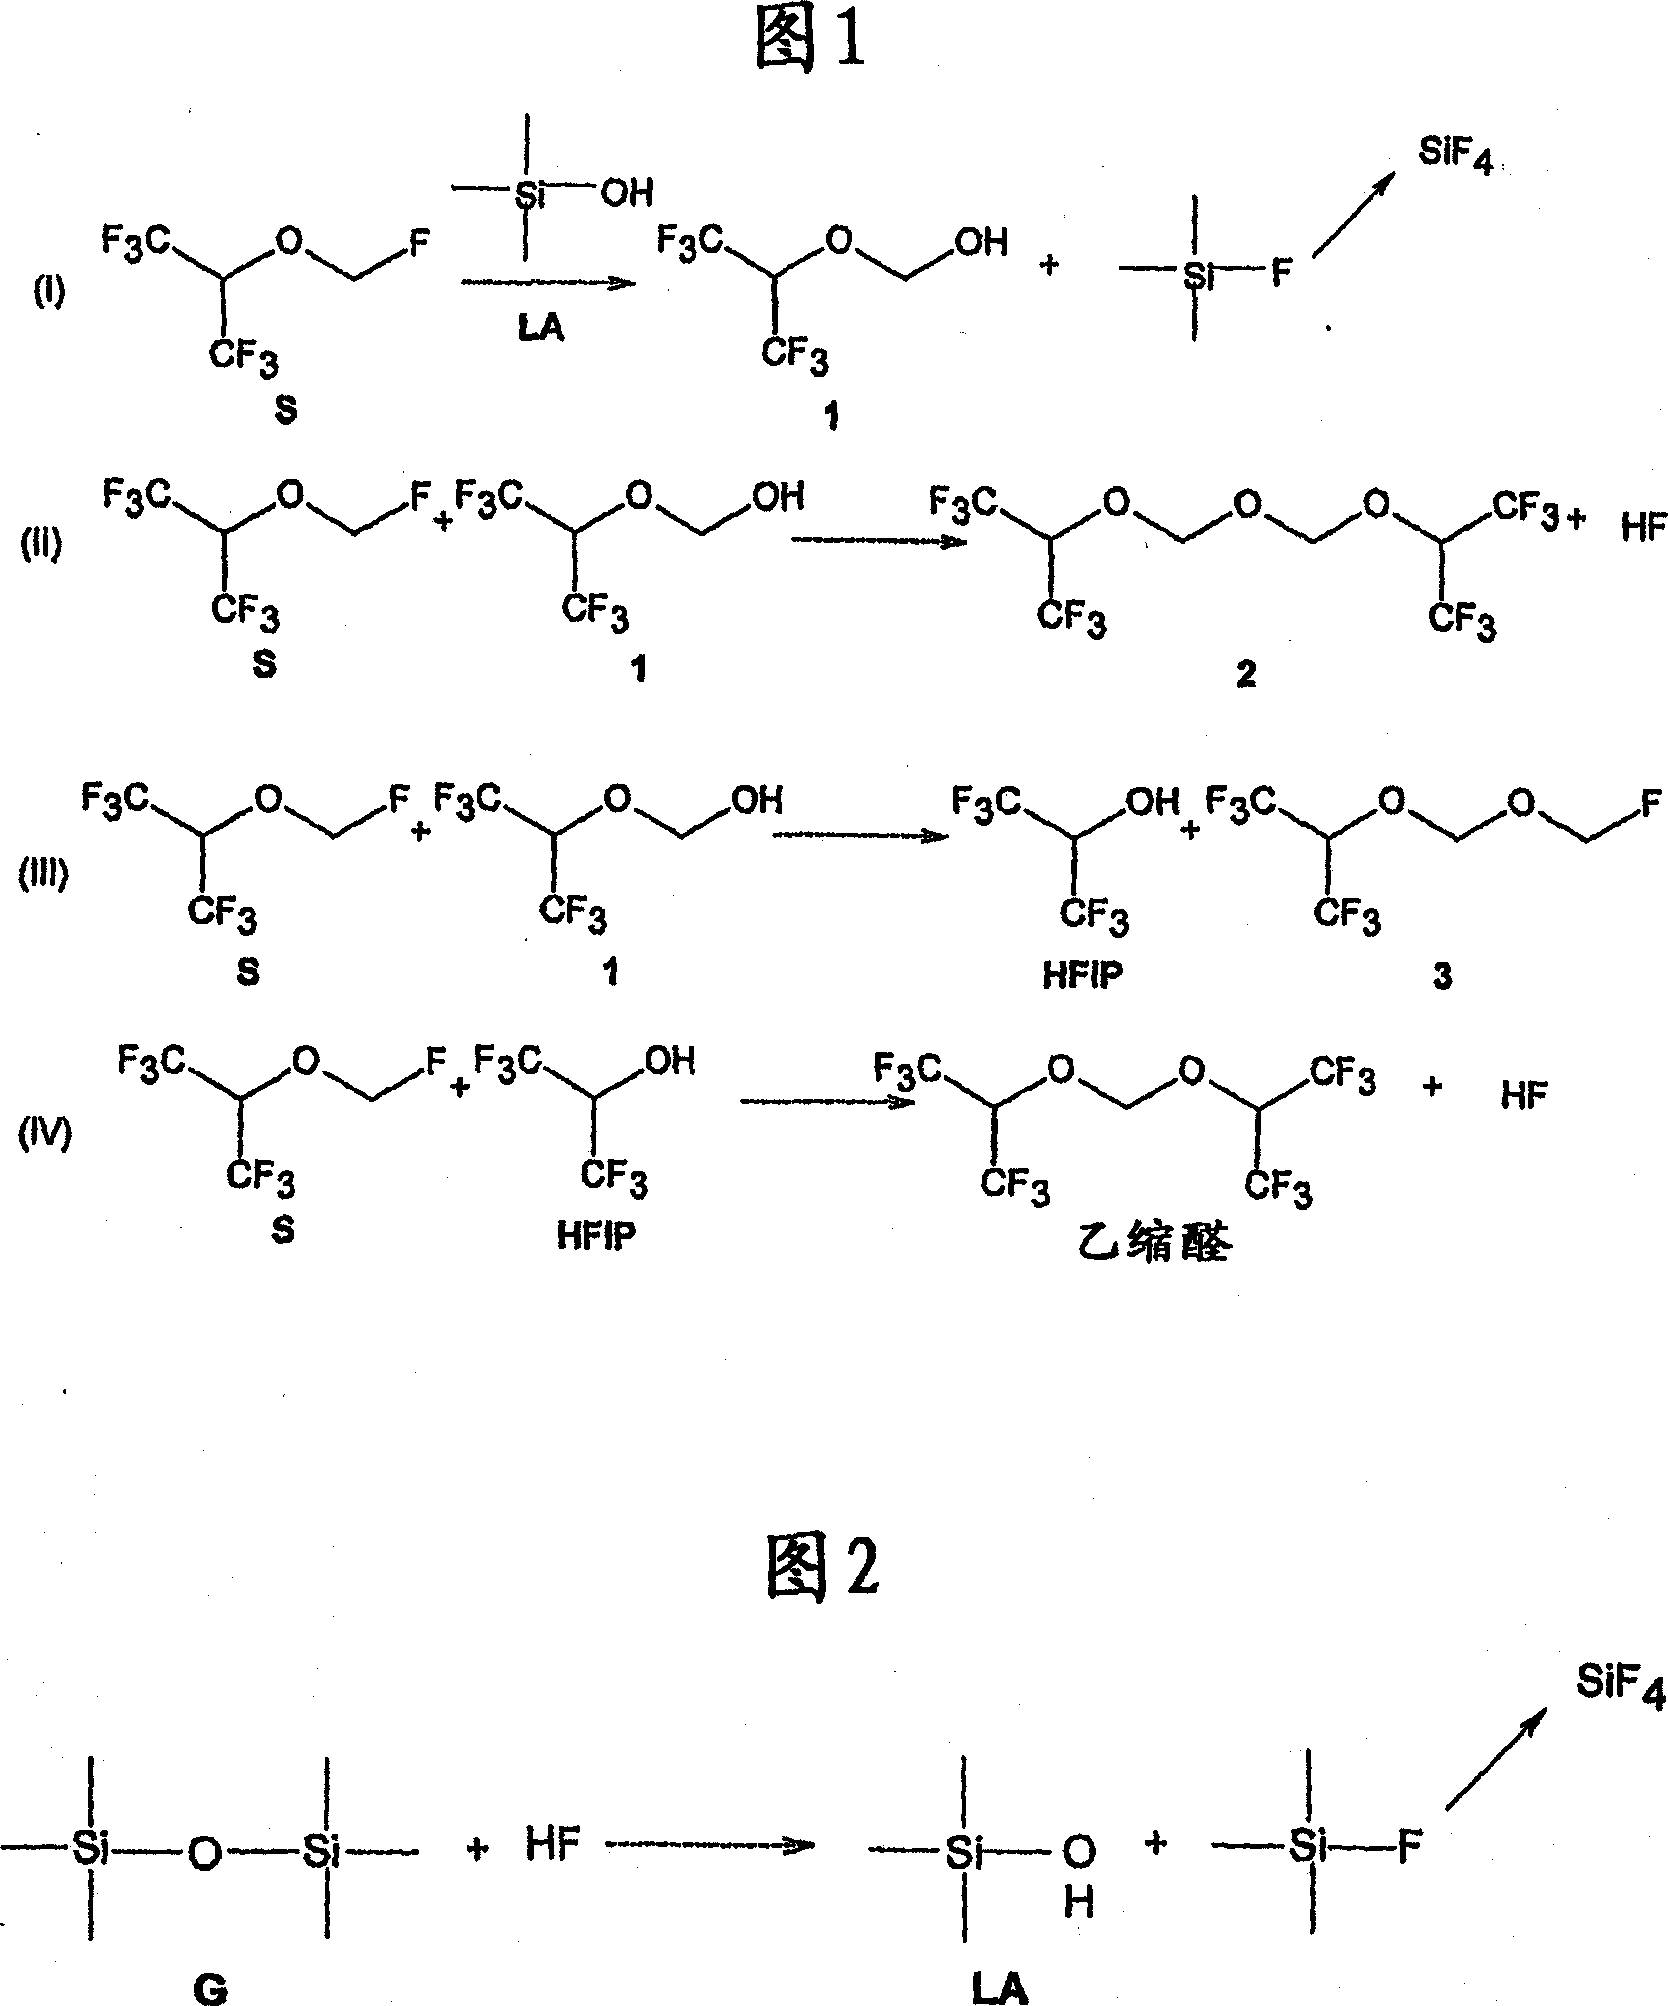 Stable pharmaceutical composition of fluoroether compound for anesthetic use, method for stabilizing a fluoroether compound, use of stabilizer agent for precluding the degradation of a fluoroether com